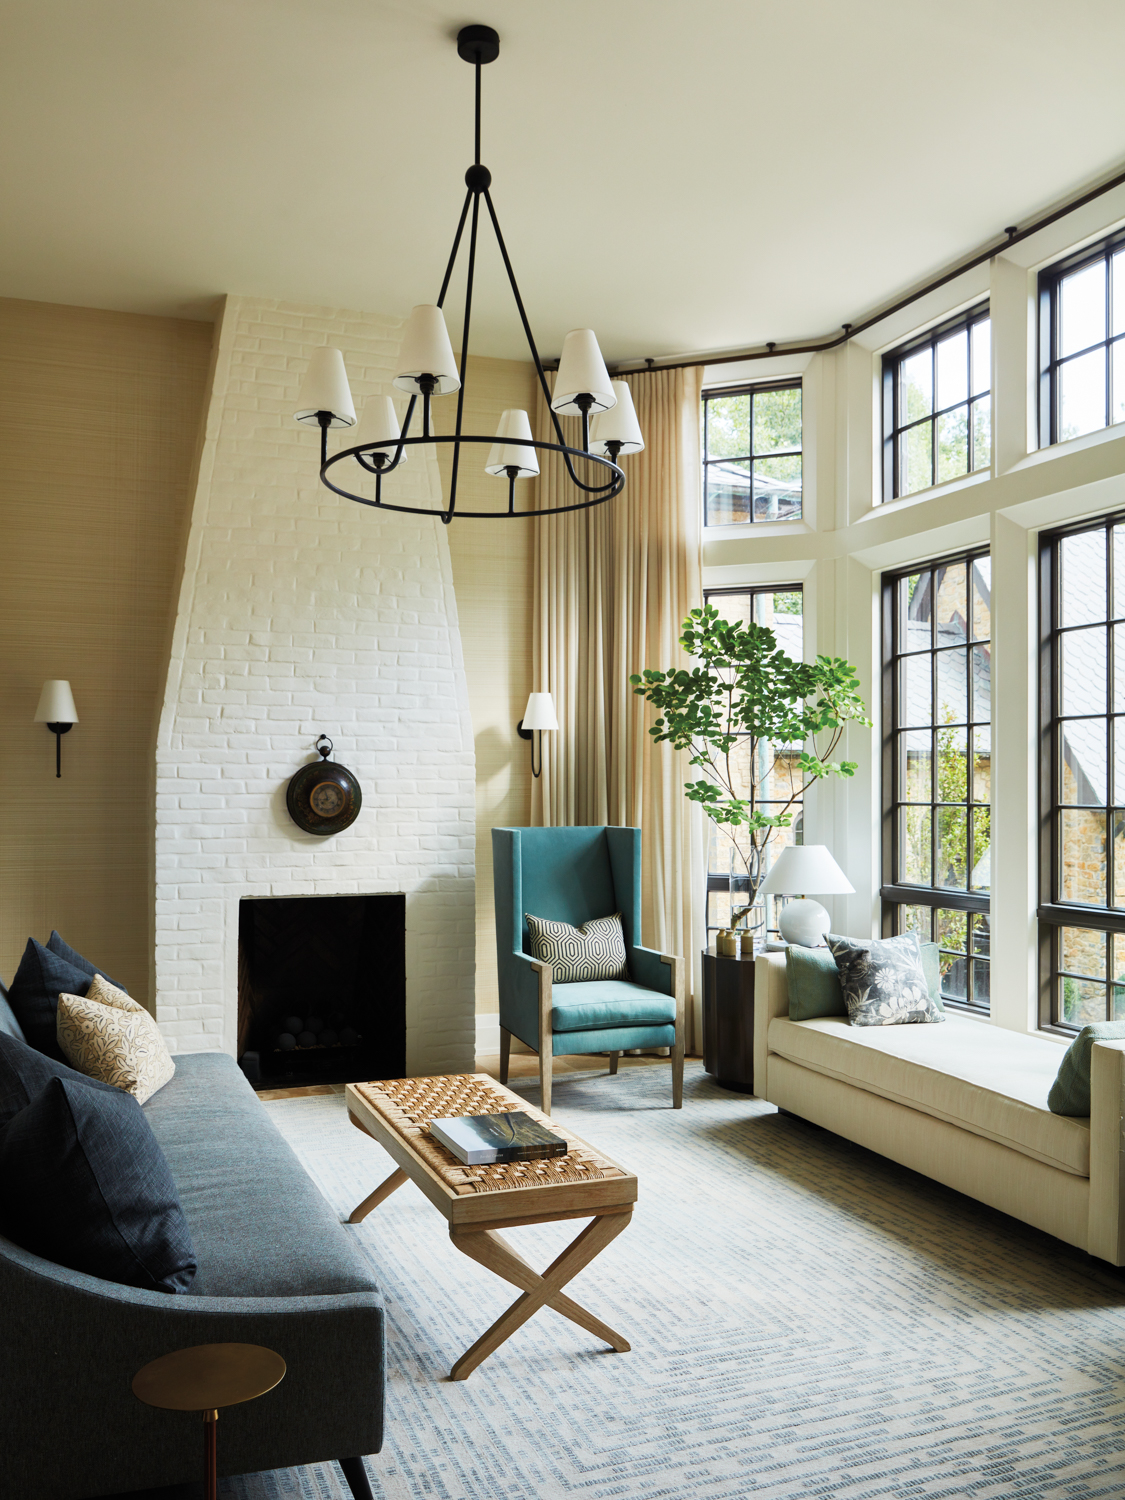 Sitting room with white painted brick fireplace, ring chandelier and daybed